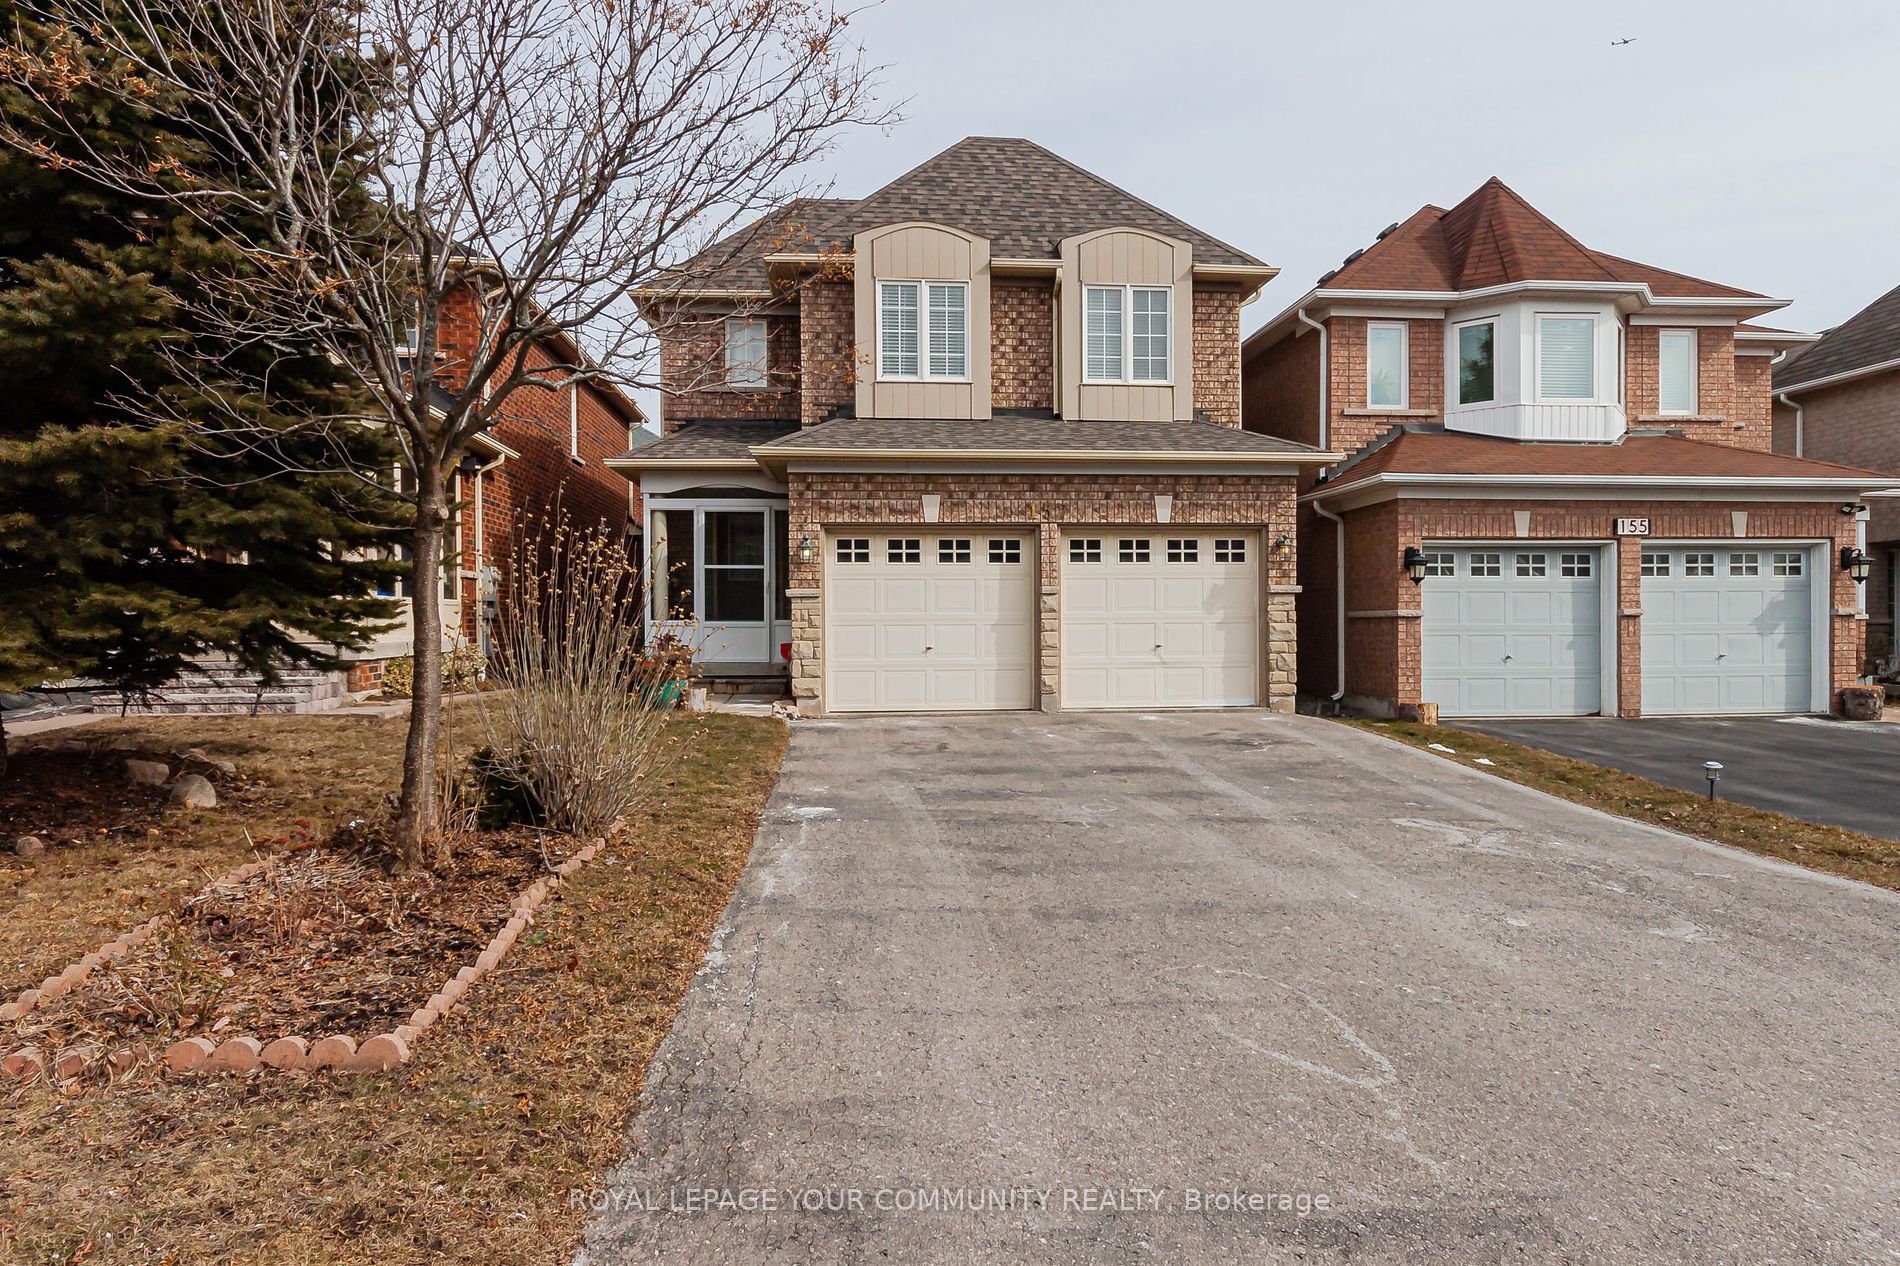 Detached house for sale at 157 Manorheights St Richmond Hill Ontario